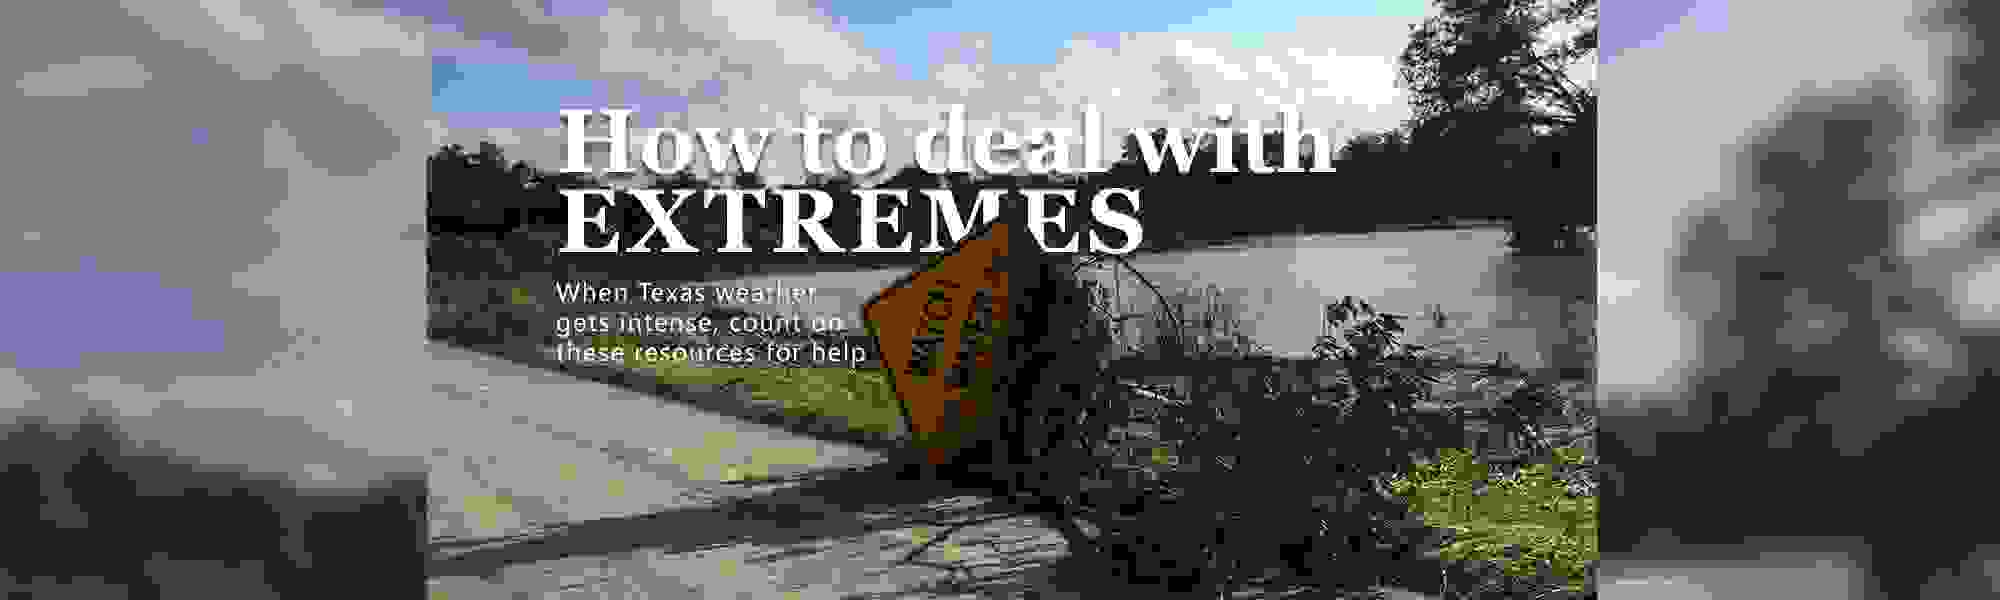 How to deal with extremes